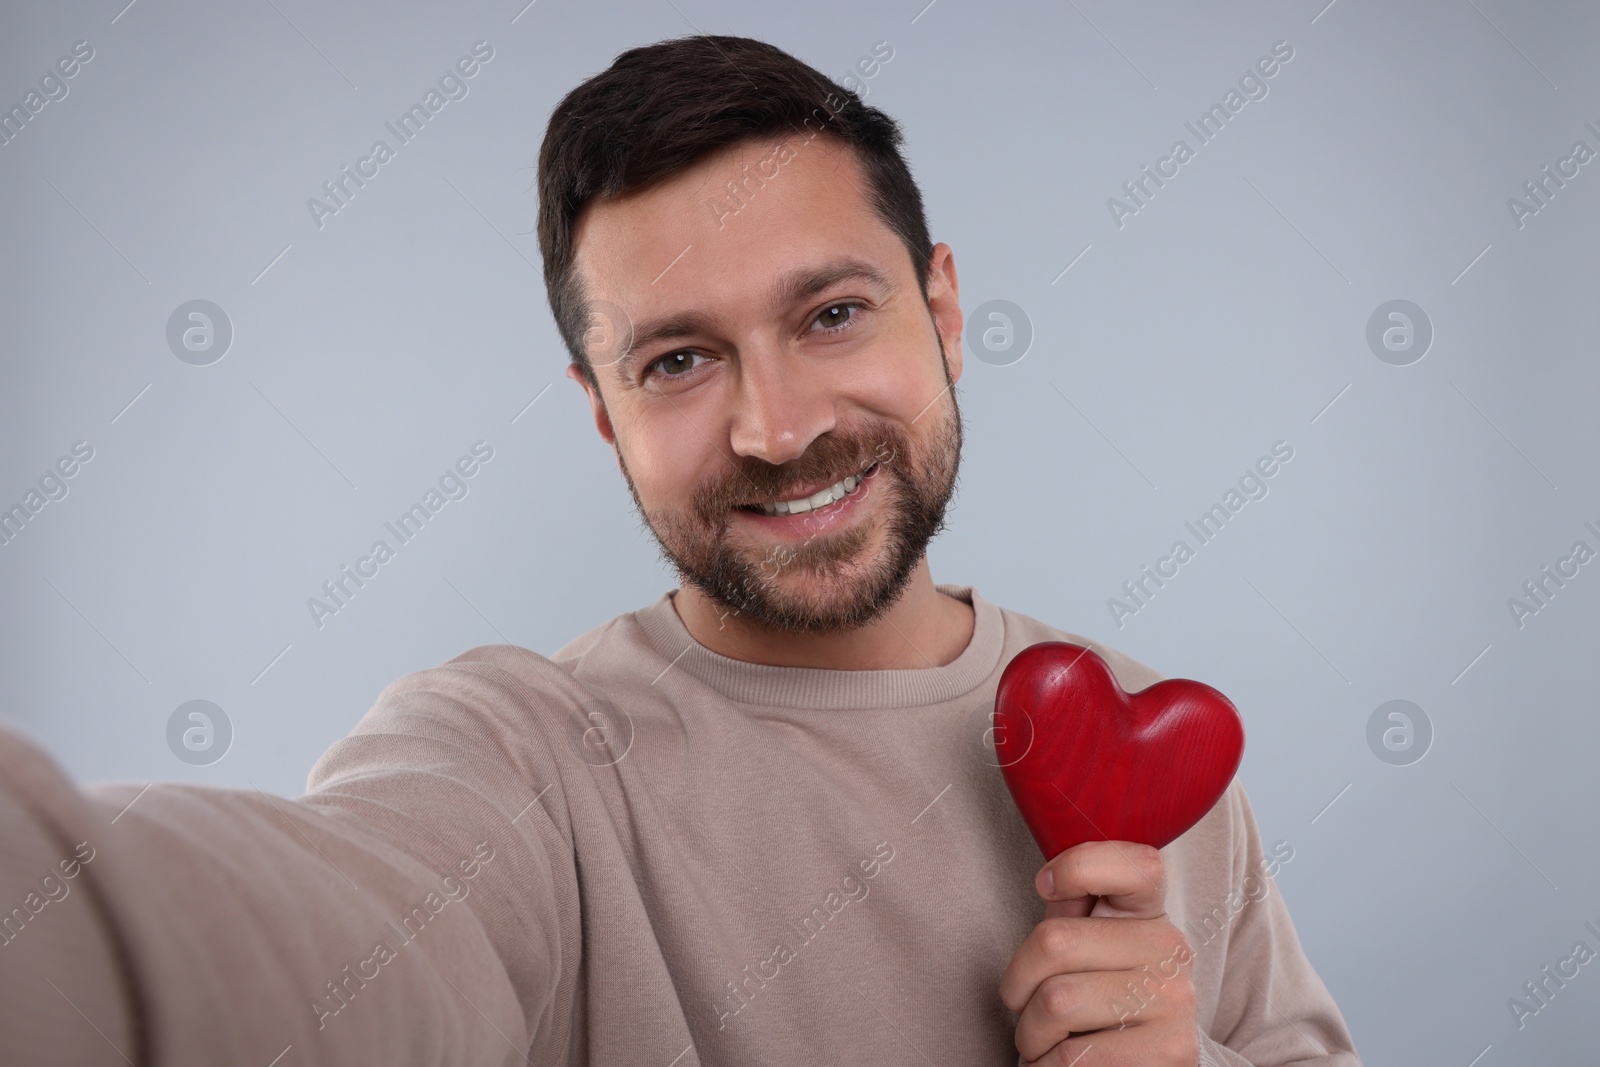 Photo of Happy man holding red heart and taking selfie on light grey background